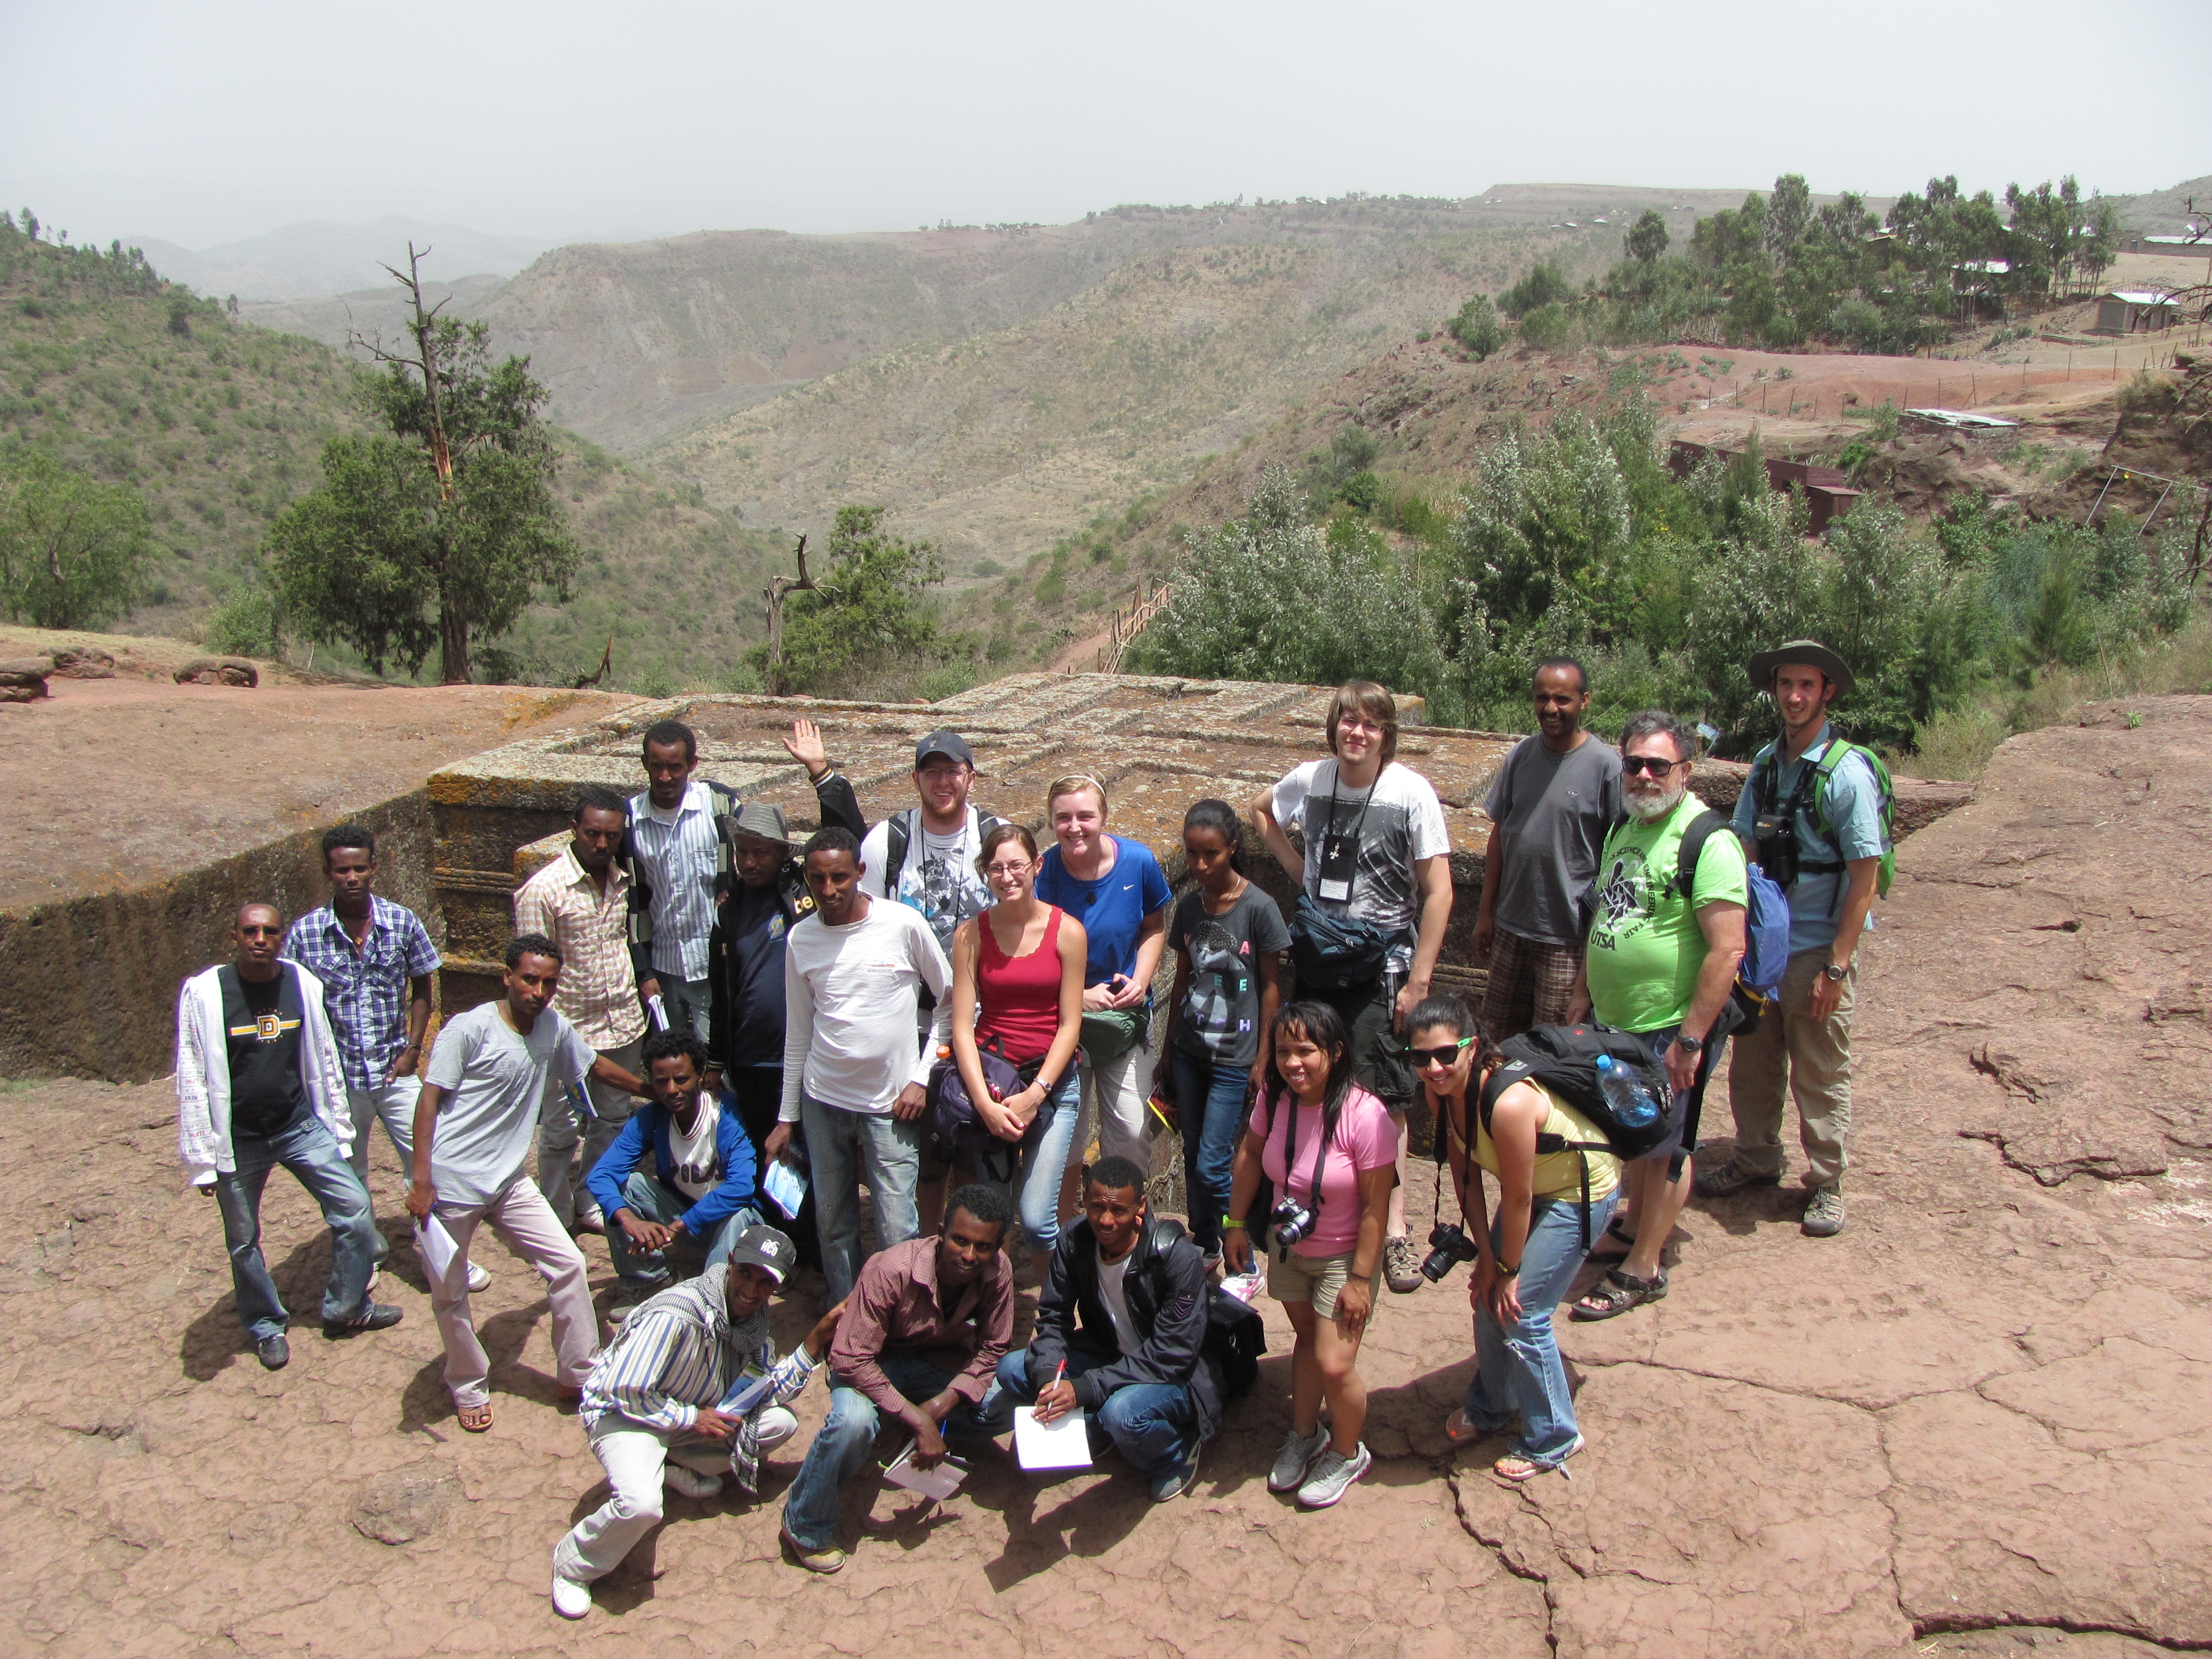 Students and faculty leader posing in Ethiopia